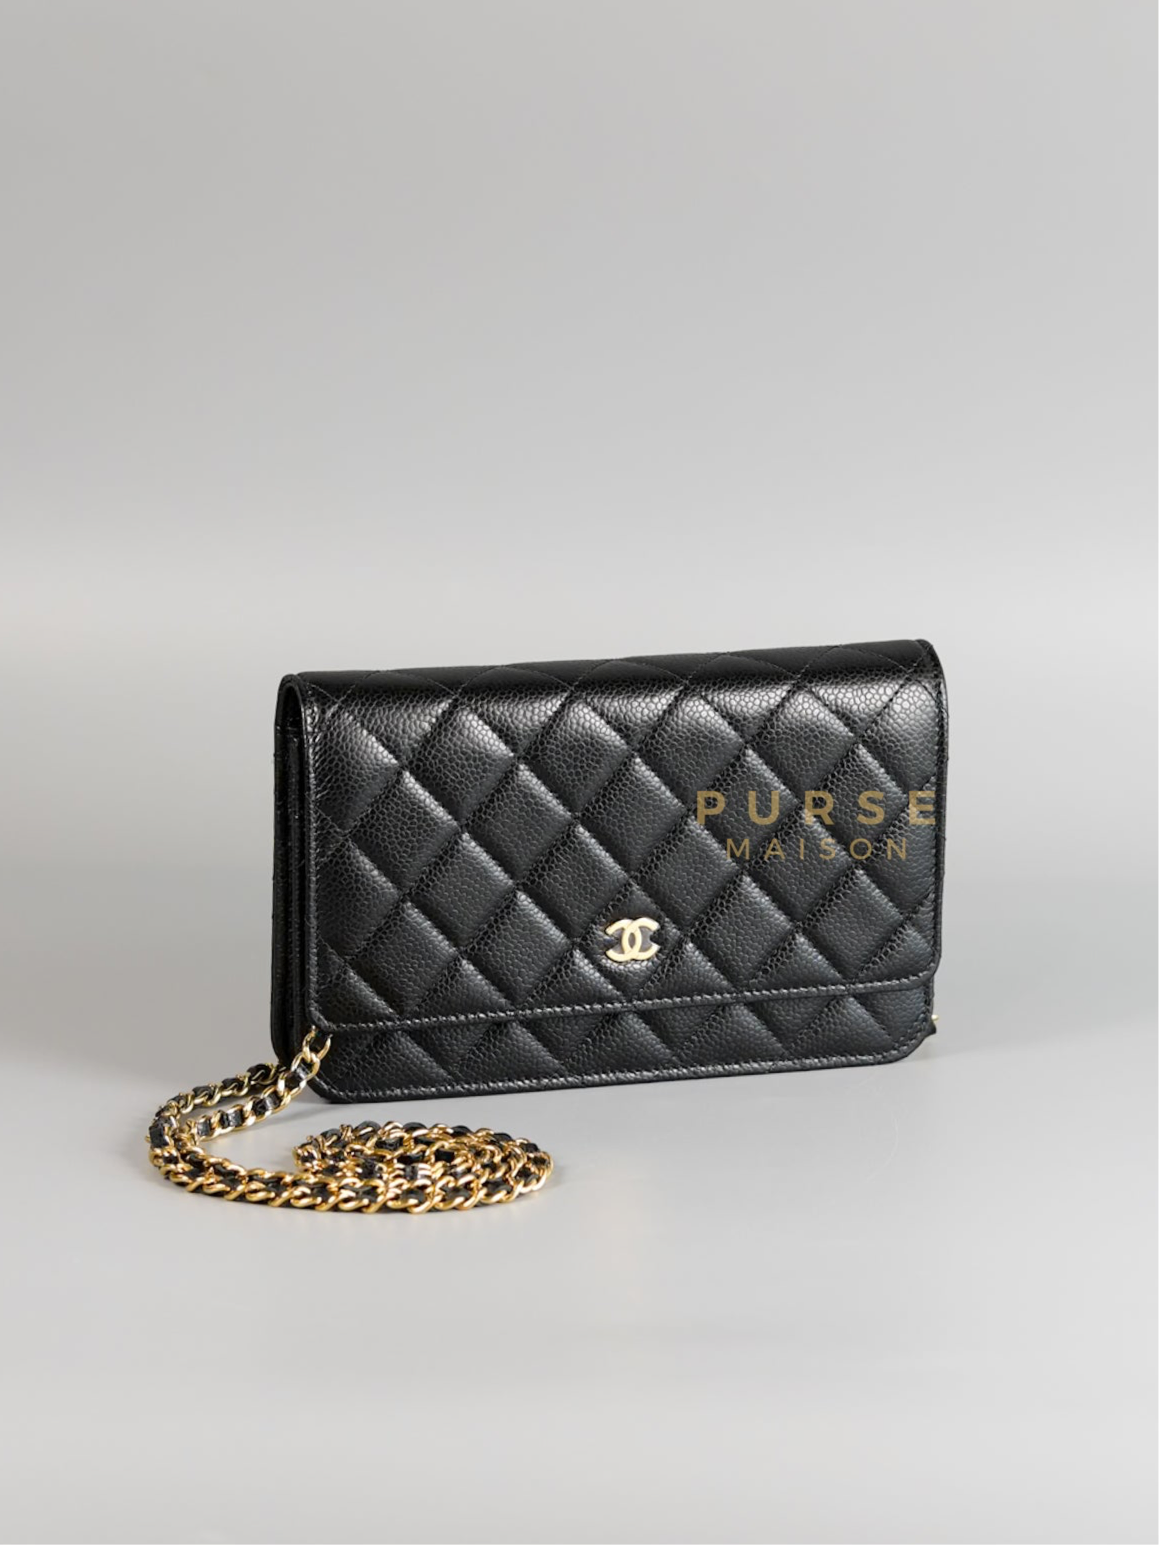 Classic Wallet on Chain (WOC) in Black Caviar Leather & Light Gold Hardware (Microchip) | Purse Maison Luxury Bags Shop